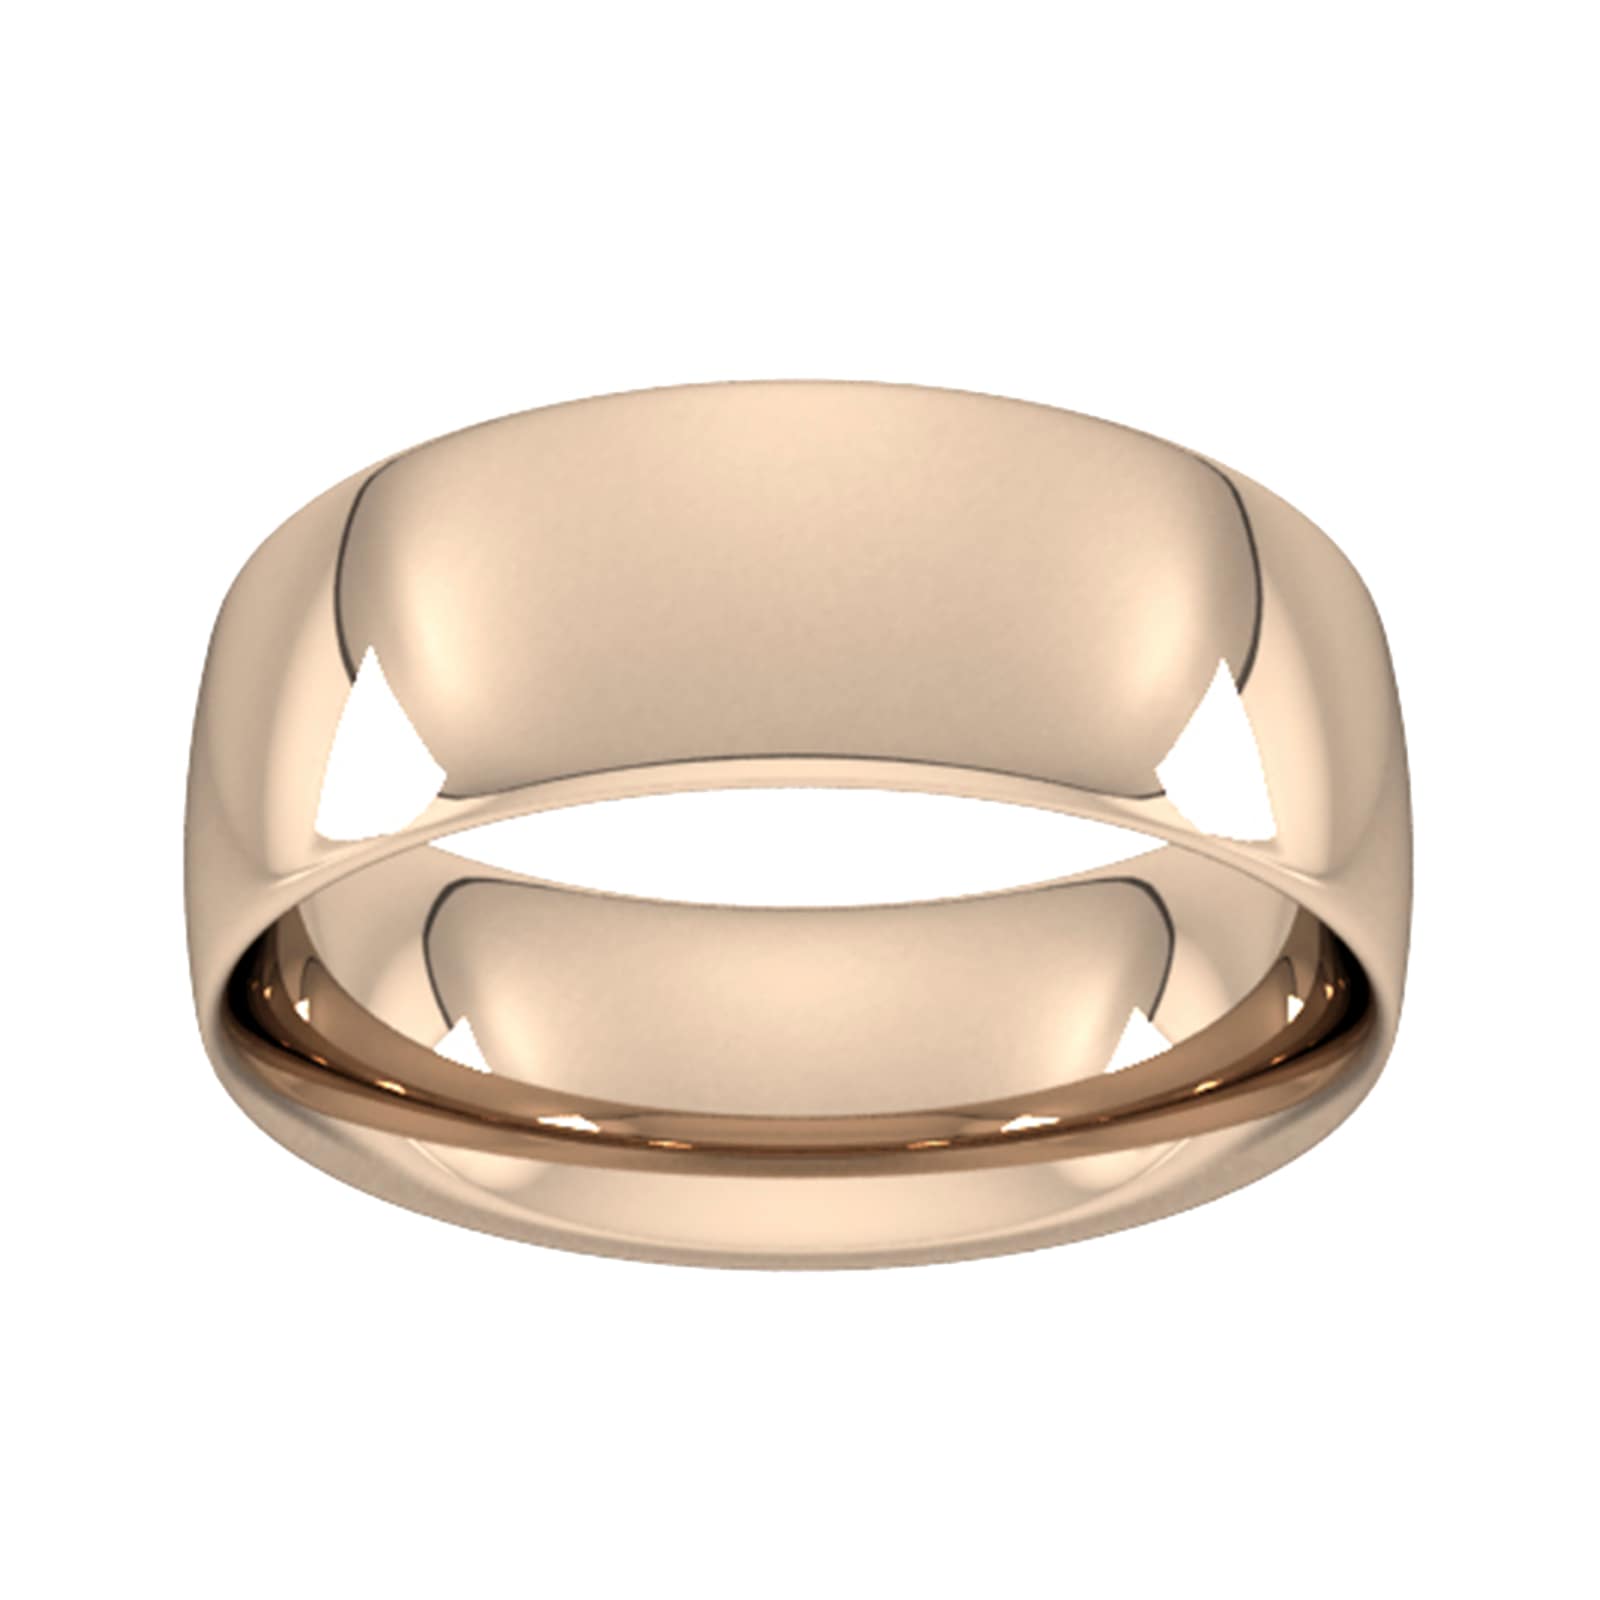 8mm Traditional Court Heavy Wedding Ring In 18 Carat Rose Gold - Ring Size M